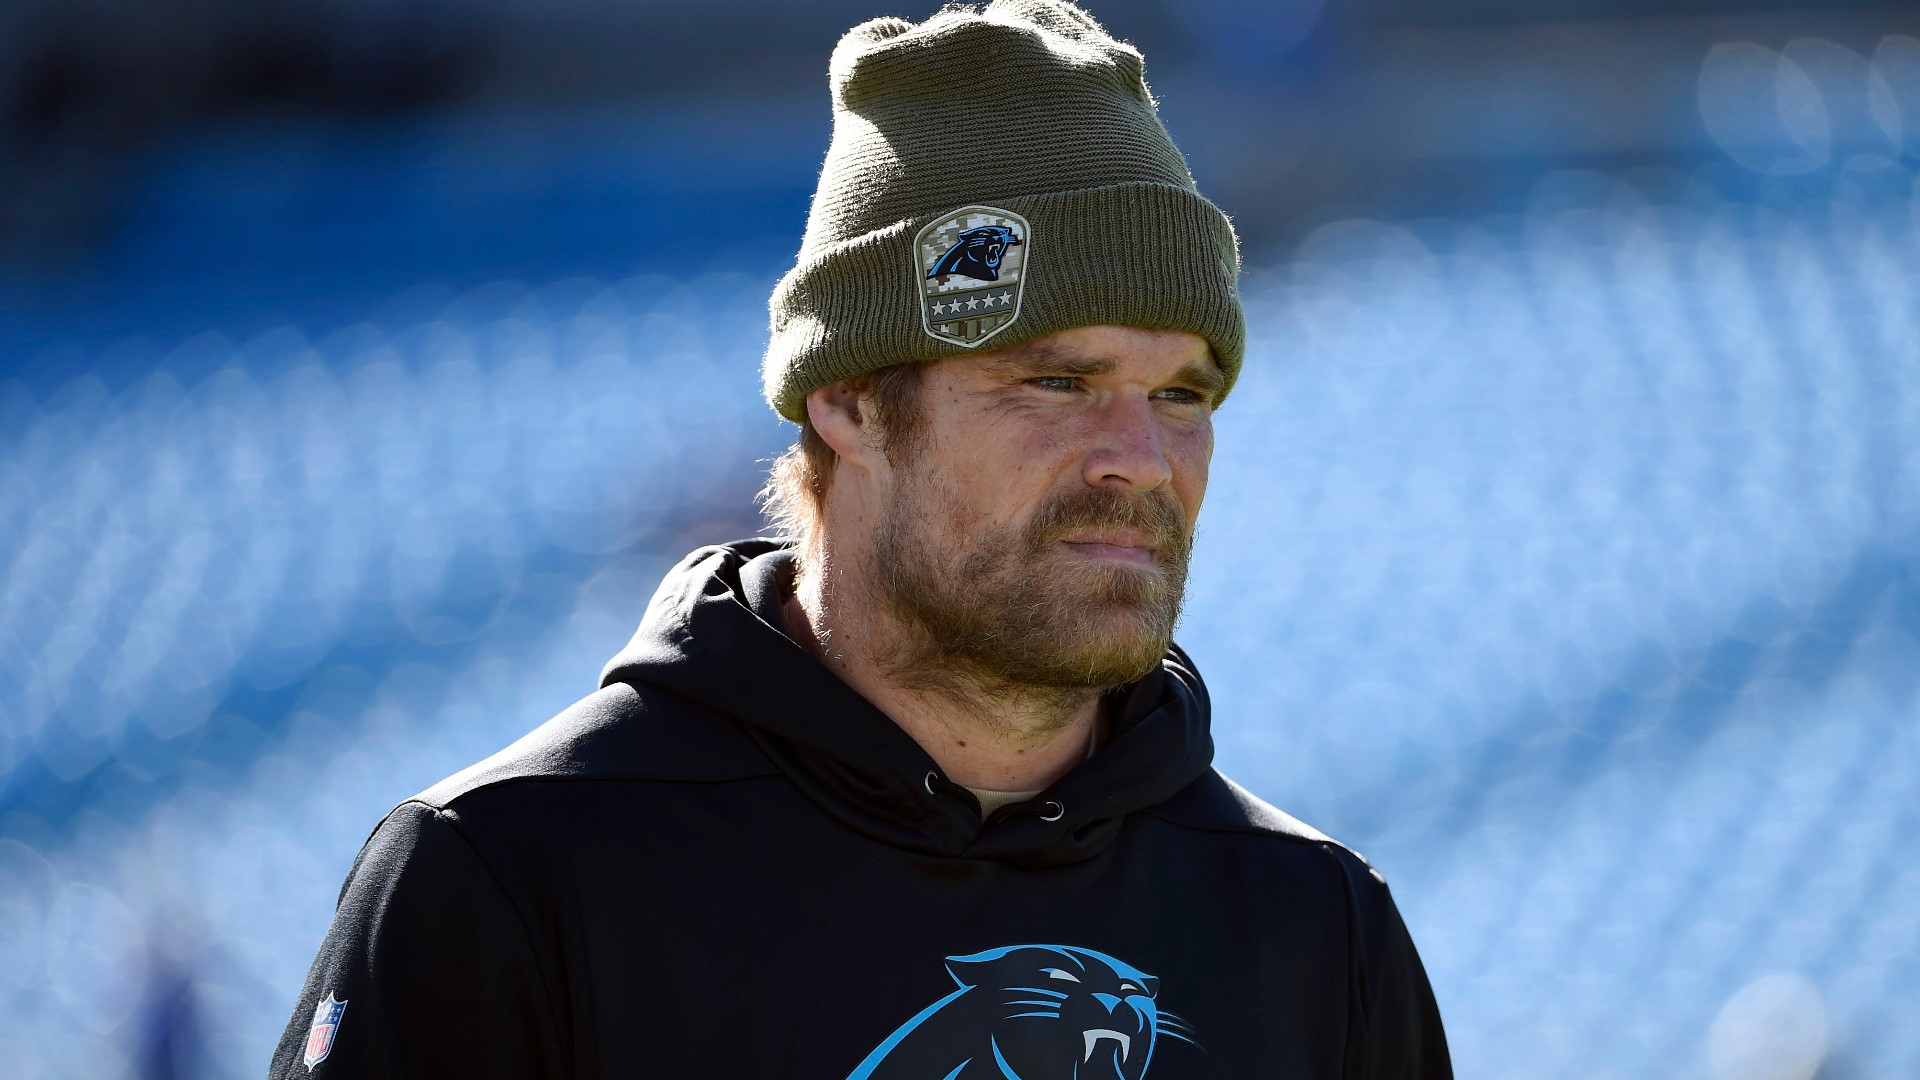 Former Panthers tight end Greg Olsen, currently with the Seattle Seahawks, announced Sunday he would be retiring from the NFL after 14 years.